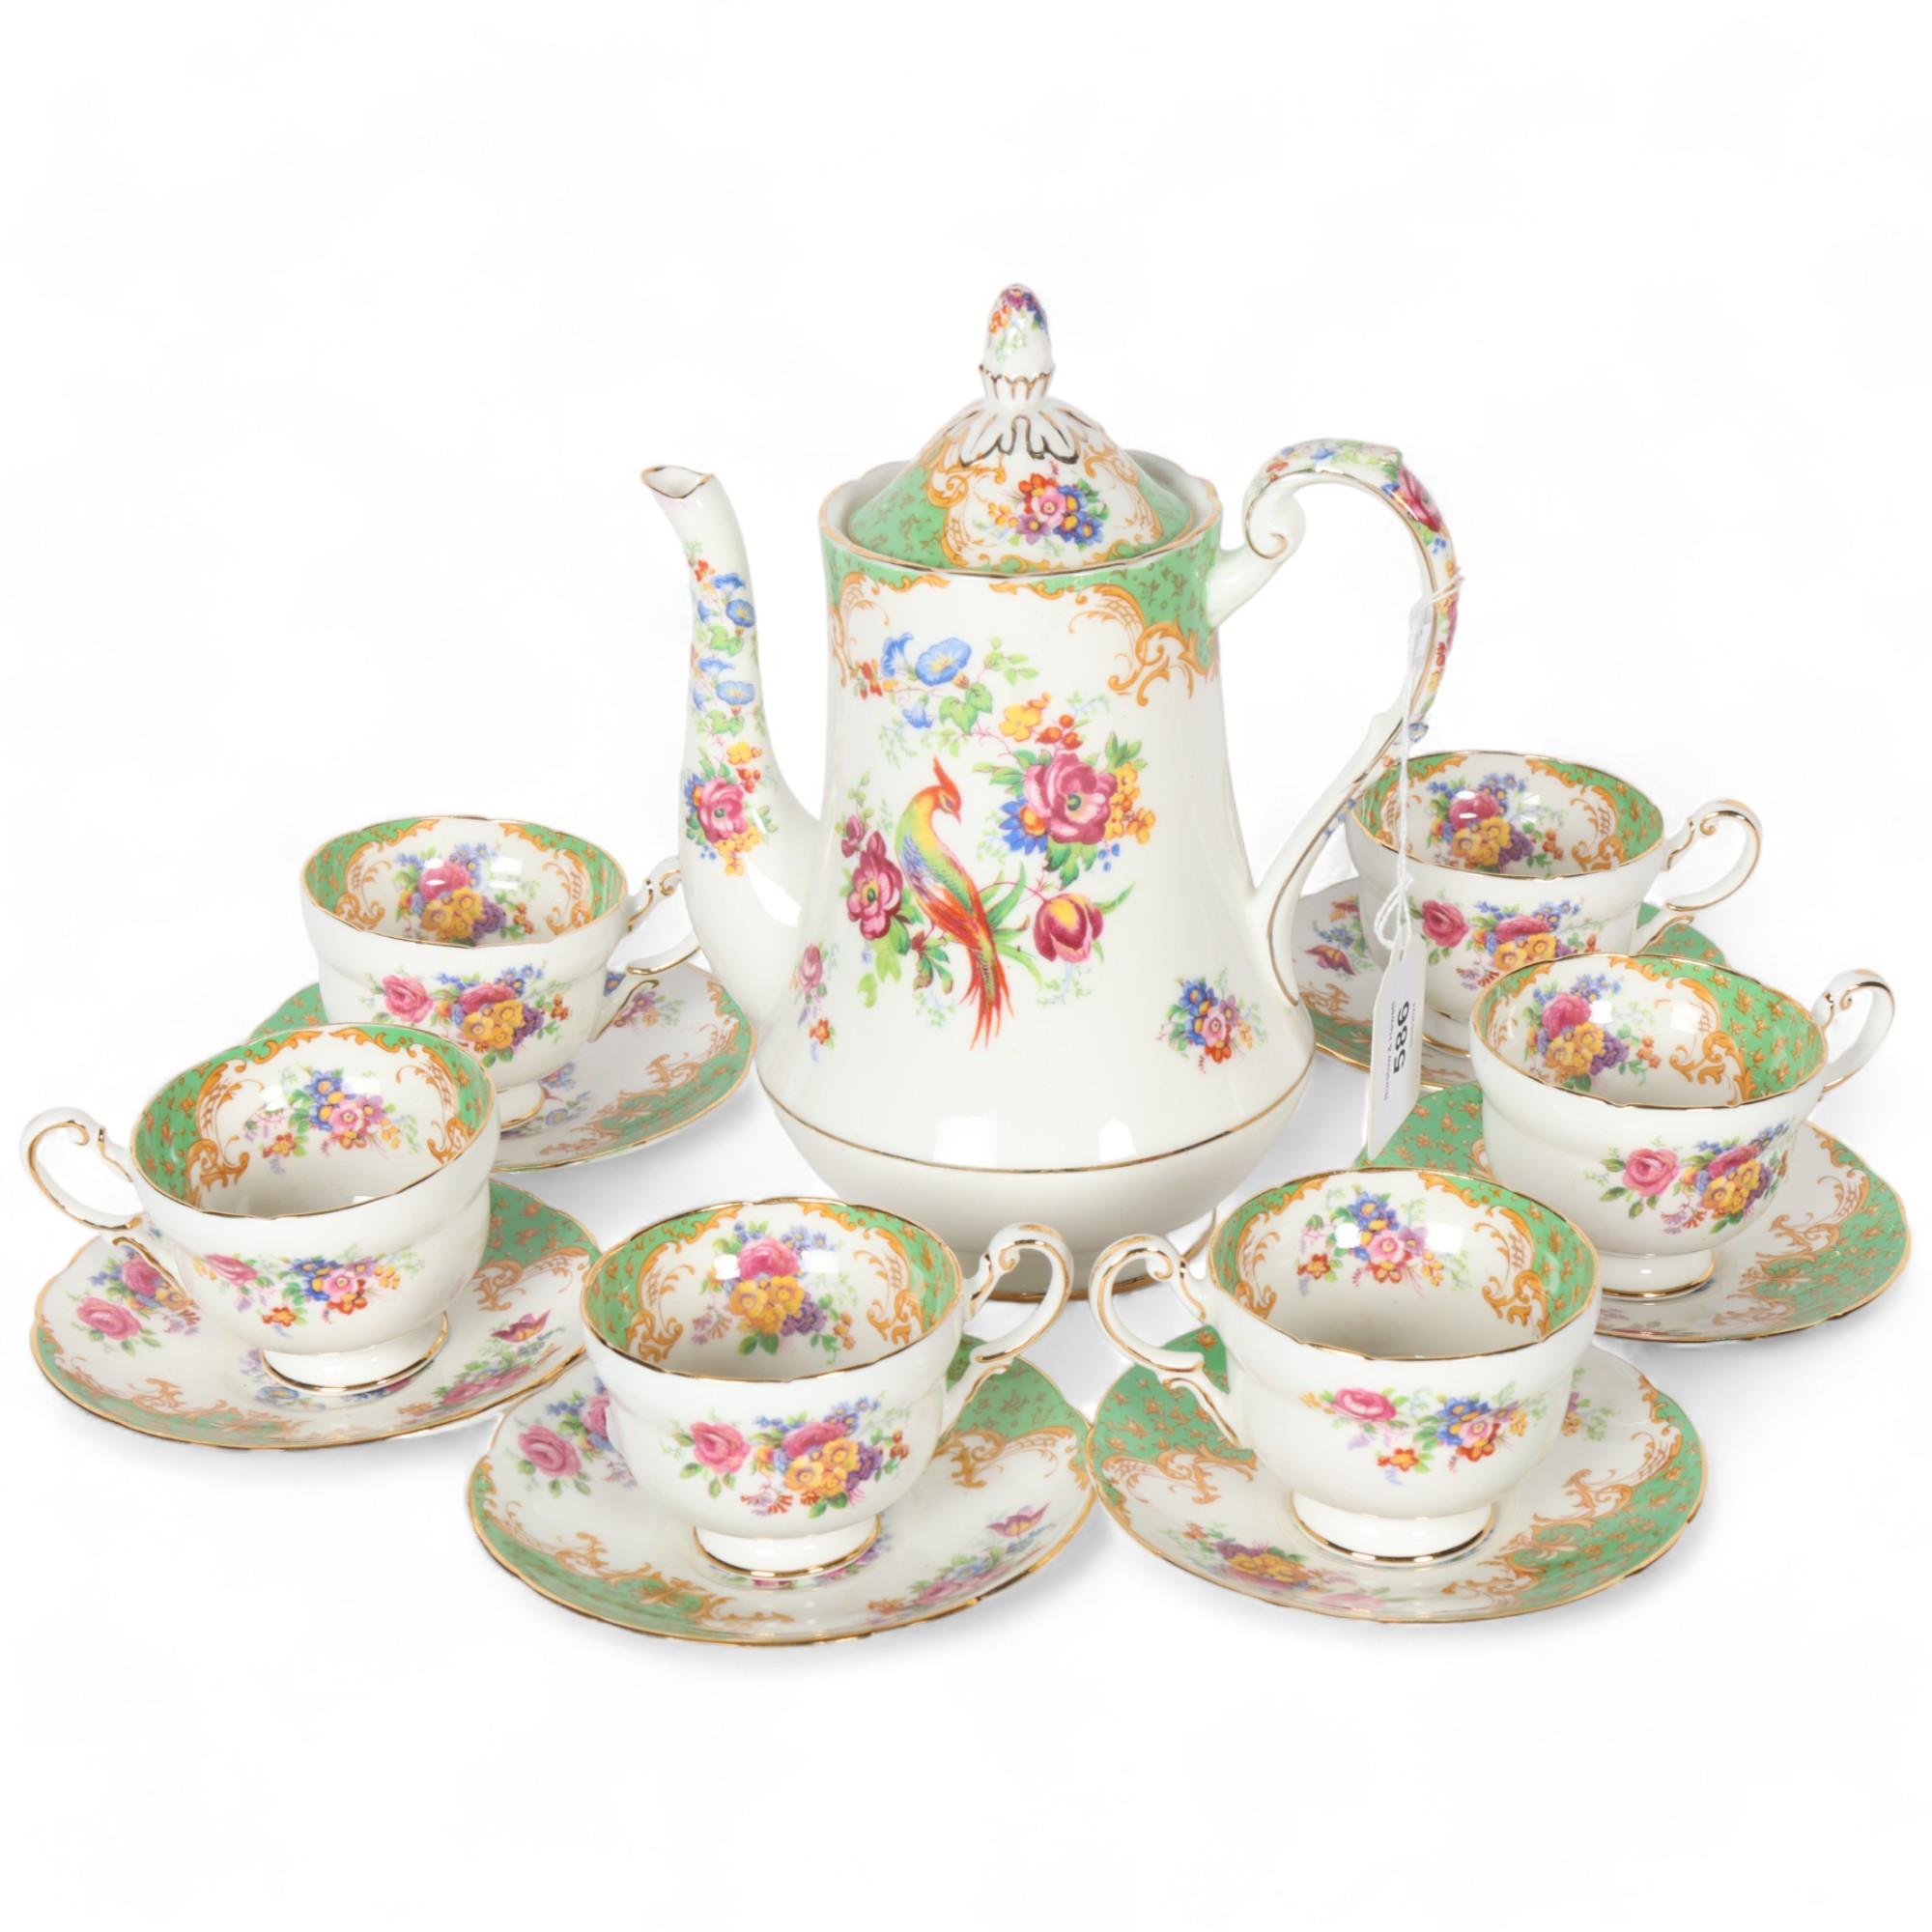 Paragon Rockingham pattern coffee cups and saucers, and matching coffee pot, with floral and bird